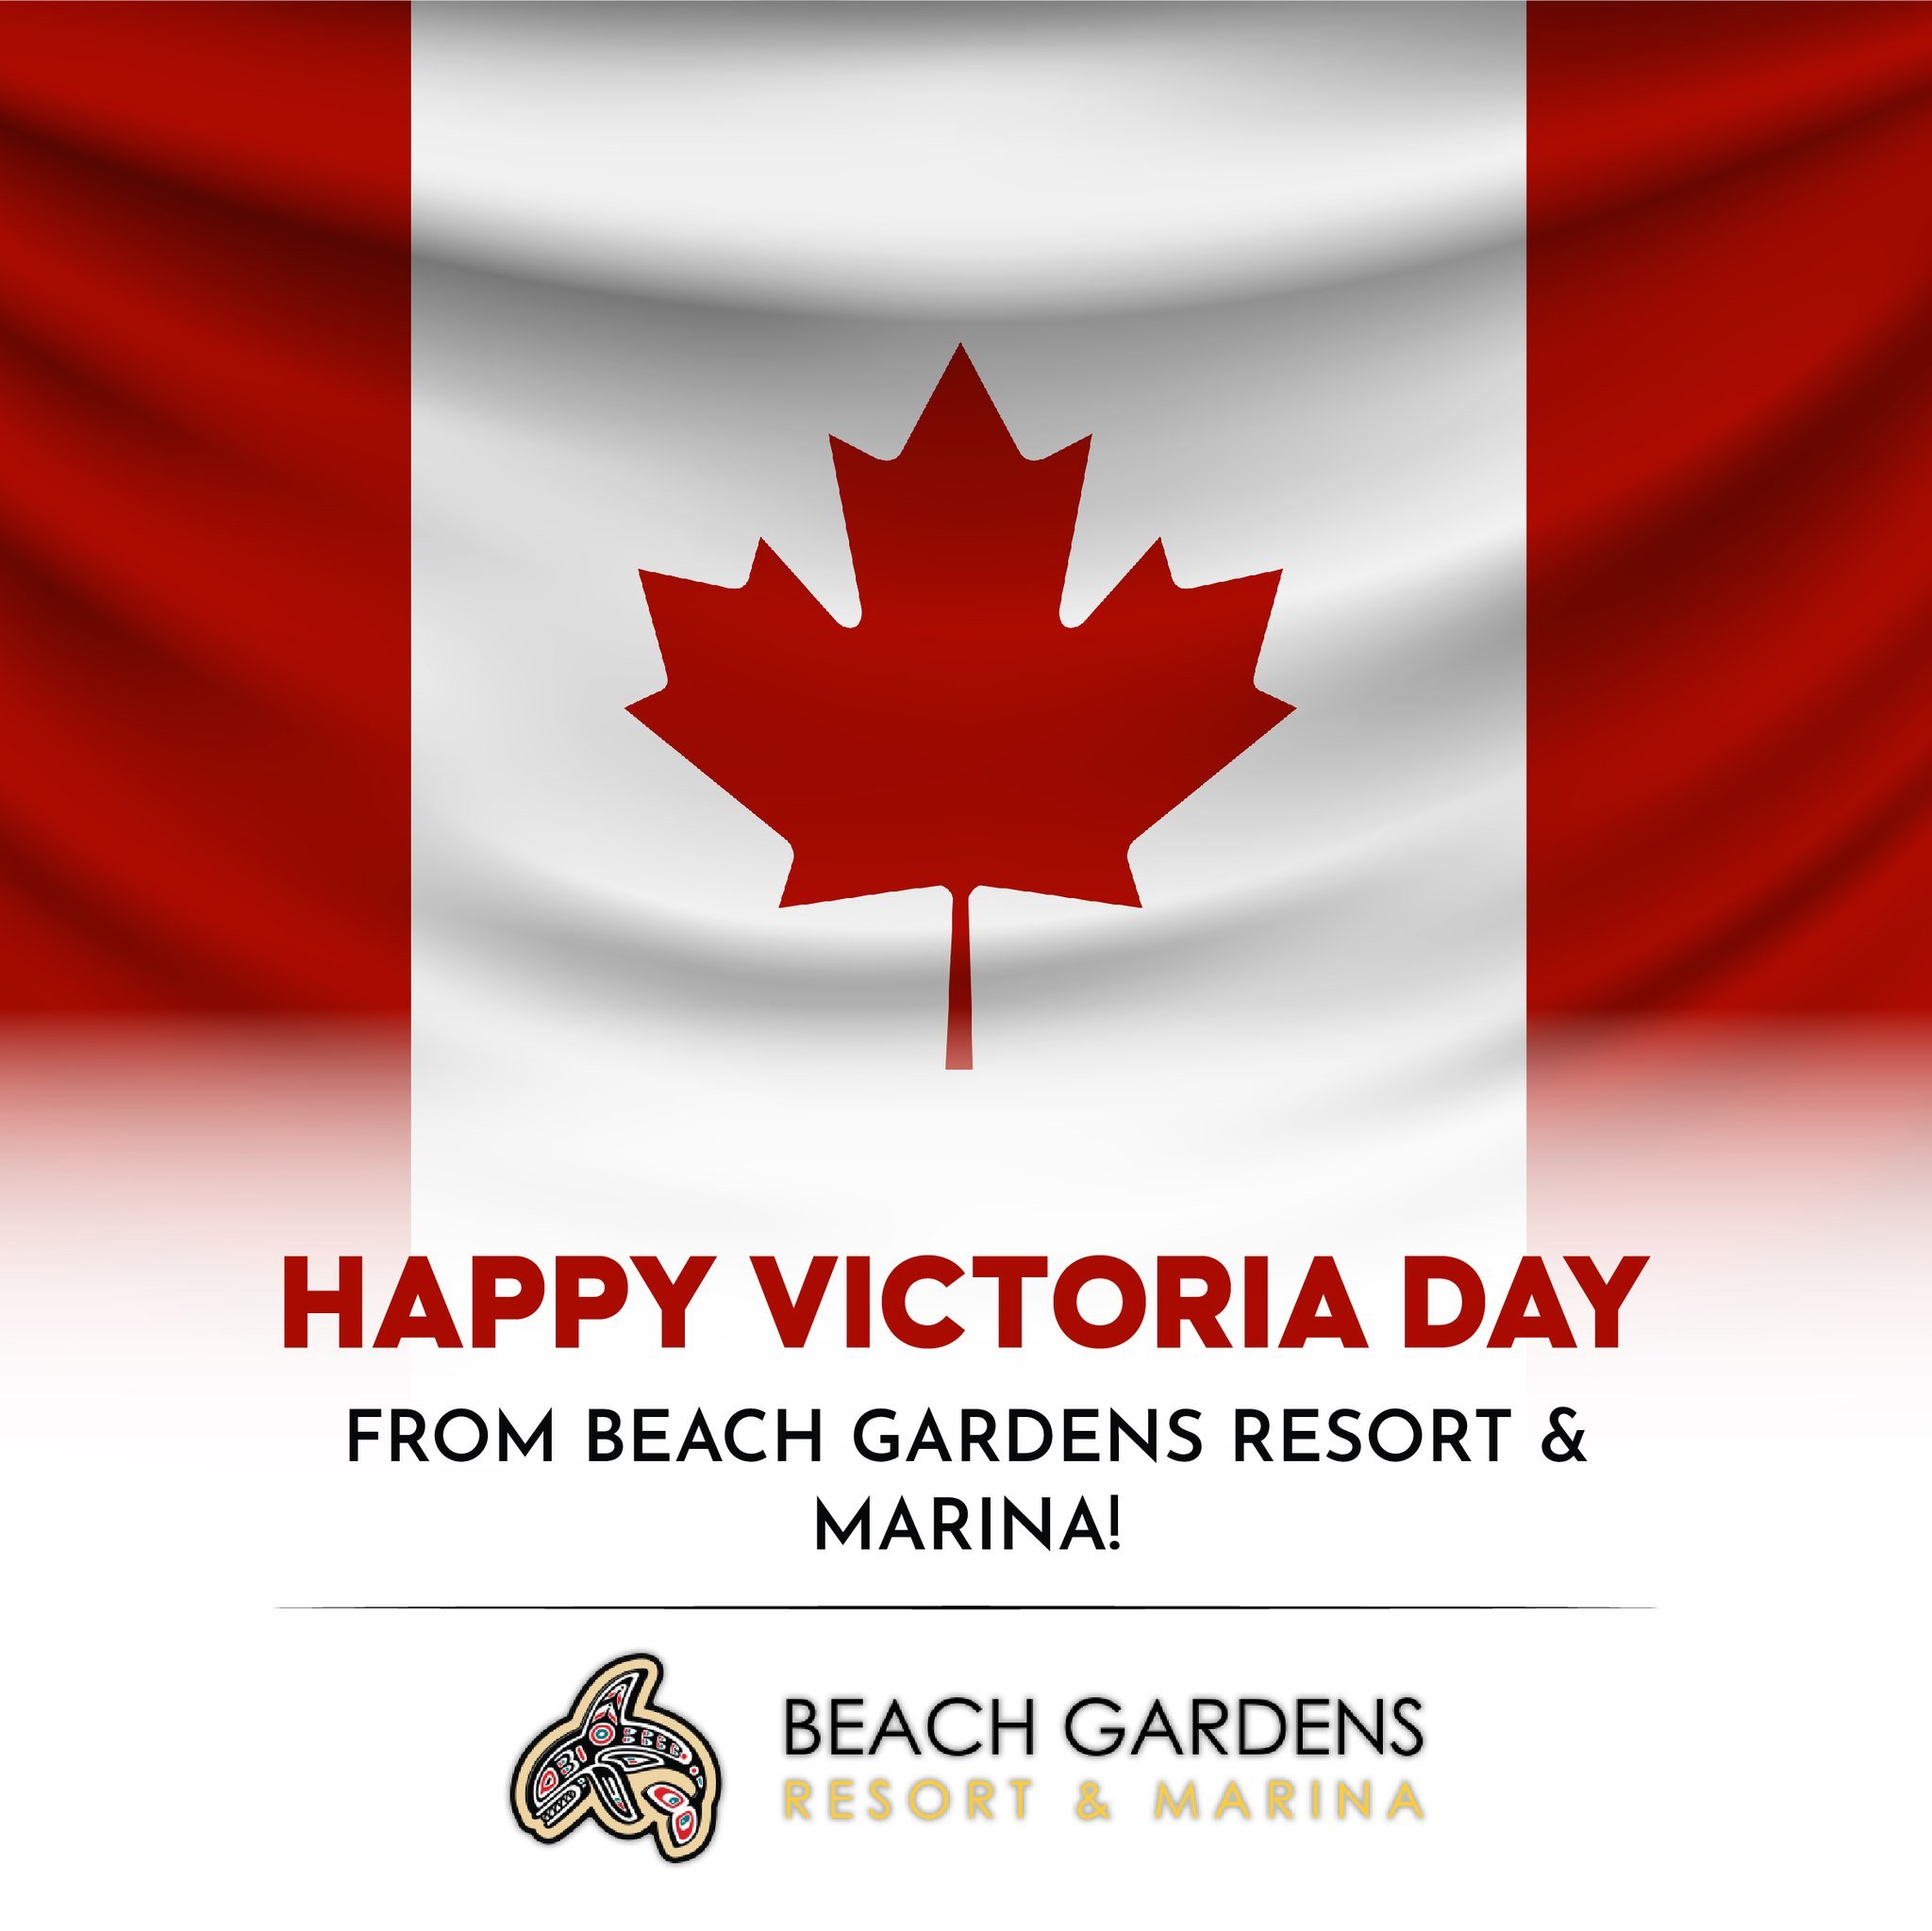 🇨🇦 Happy Victoria Day from Beach Gardens Resort &amp; Marina! 🌟

Today, we celebrate Queen Victoria's birthday and the beauty of our great nation. It's a day to appreciate our rich history and the natural wonders that surround us.

At Beach Garden